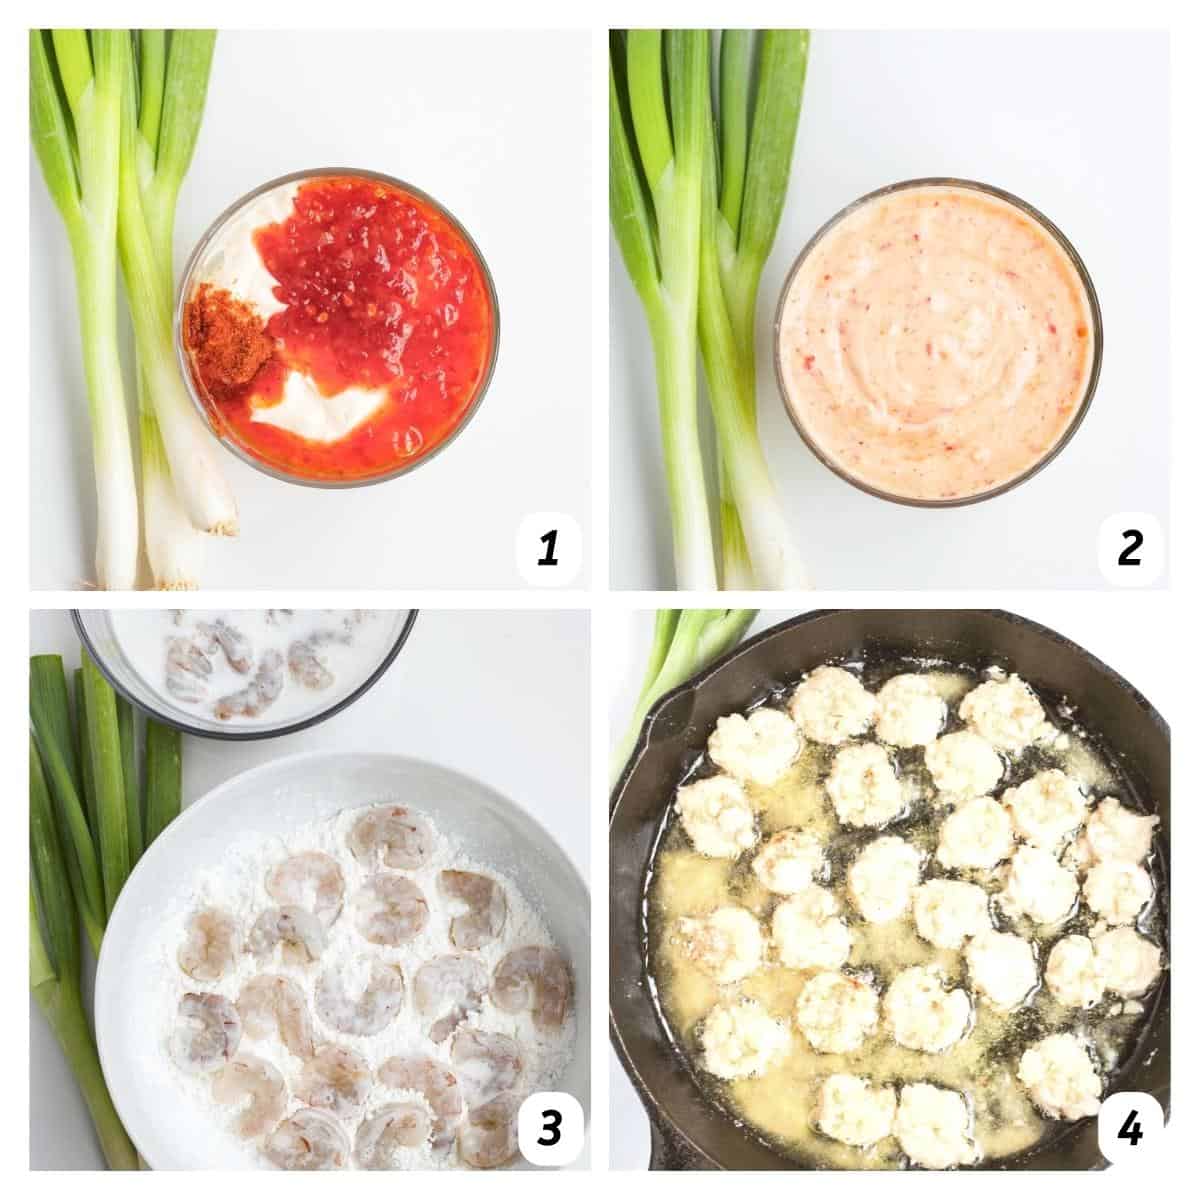 Four panel grid of process shots 2-4 - combining ingredients to make sauce, coating shrimp in cornstarch, and frying in a skillet.